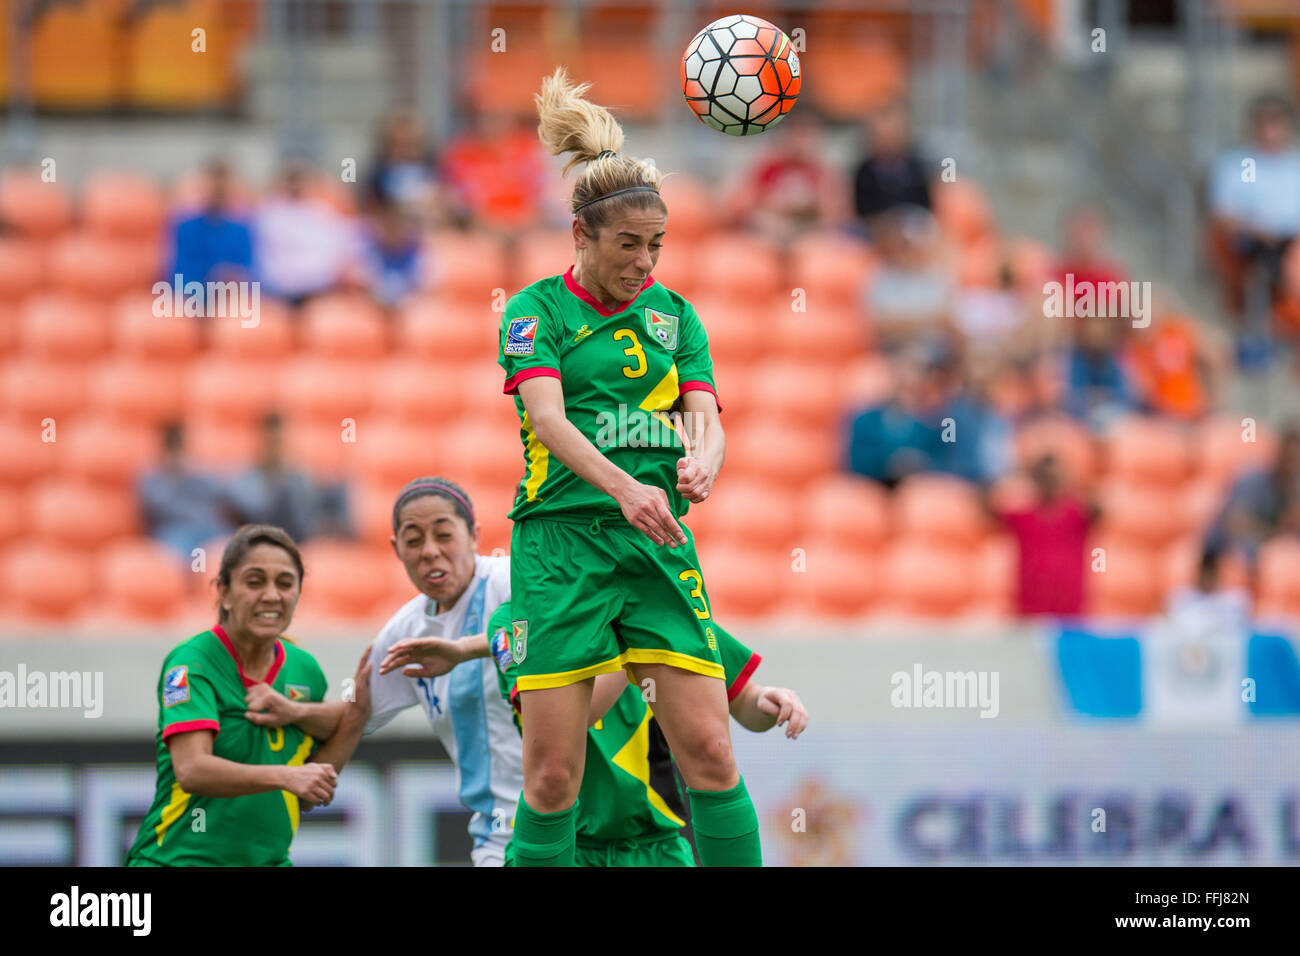 Houston, TX, USA. 14th Feb, 2016. Guyana defender Briana DeSouza (3) heads the ball during a CONCACAF Olympic Qualifying soccer match between Guatemala and Guyana at BBVA Compass Stadium in Houston, TX. Guyana won 2-1.Trask Smith/CSM/Alamy Live News Stock Photo